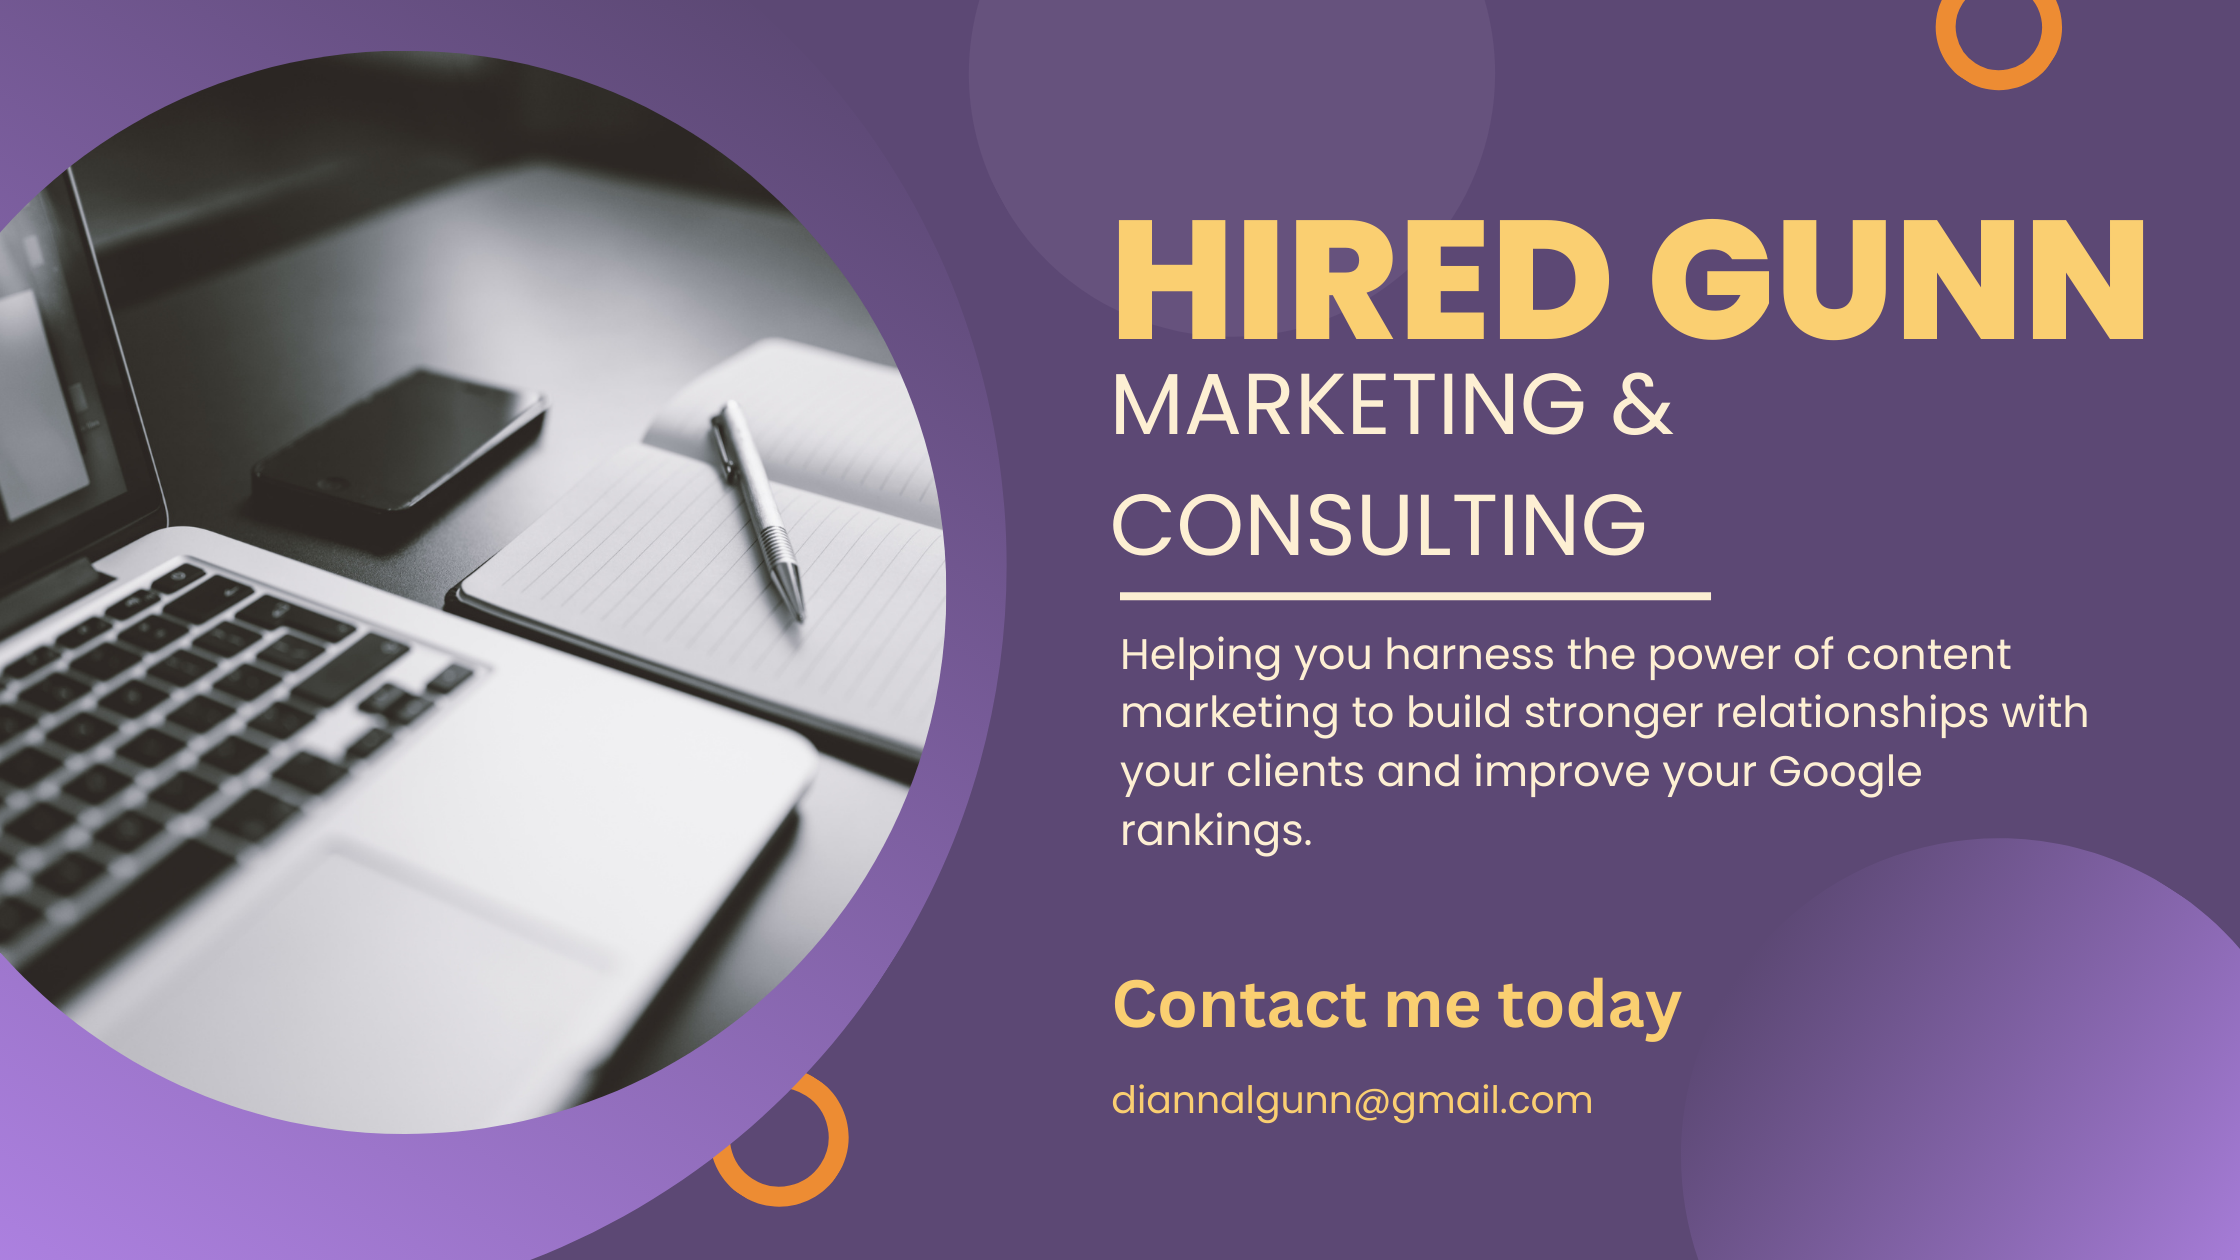 Hired Gunn Marketing & Consulting banner with contact email diannalgunn@gmail.com